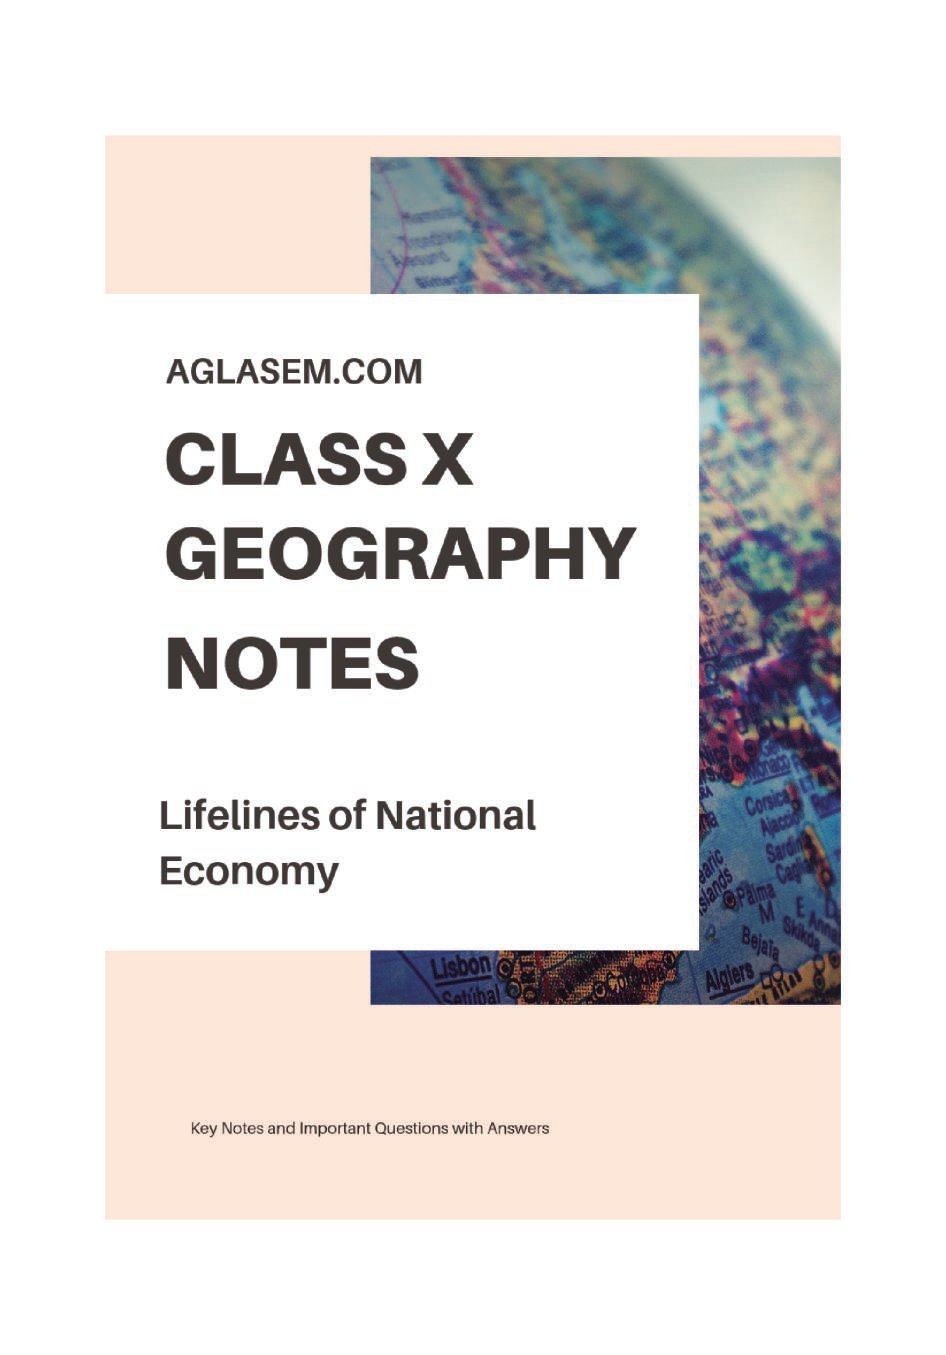 Class 10 Social Science Geography Notes for Lifelines of National Economy - Page 1